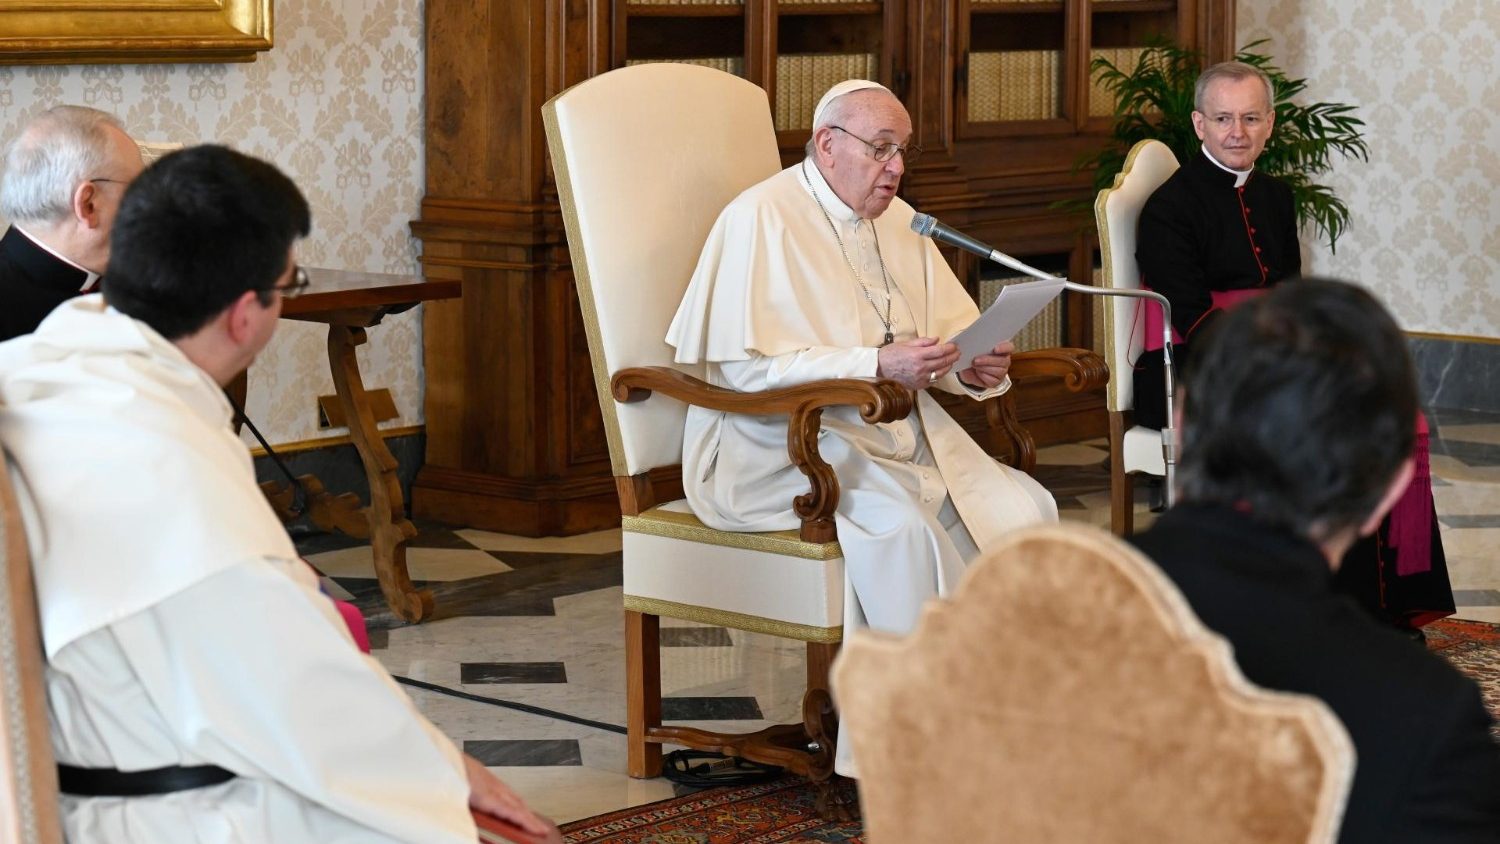 Pope in audience: prayer opens us to the Trinity